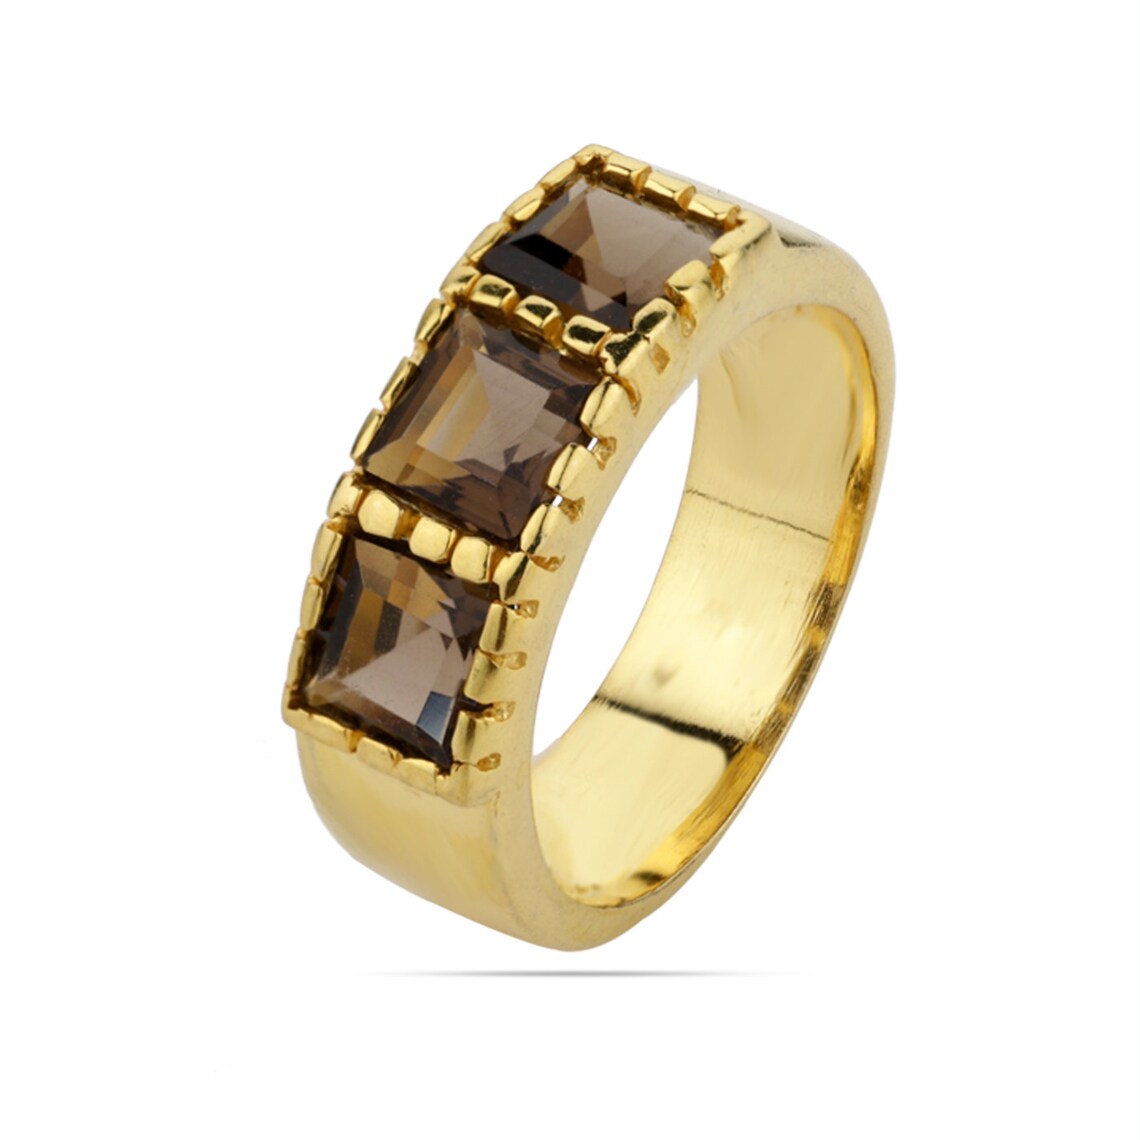 Smoky Quartz Gold Plated Ring, Smoky Quartz Sterling Silver Gold Plated Band Ring